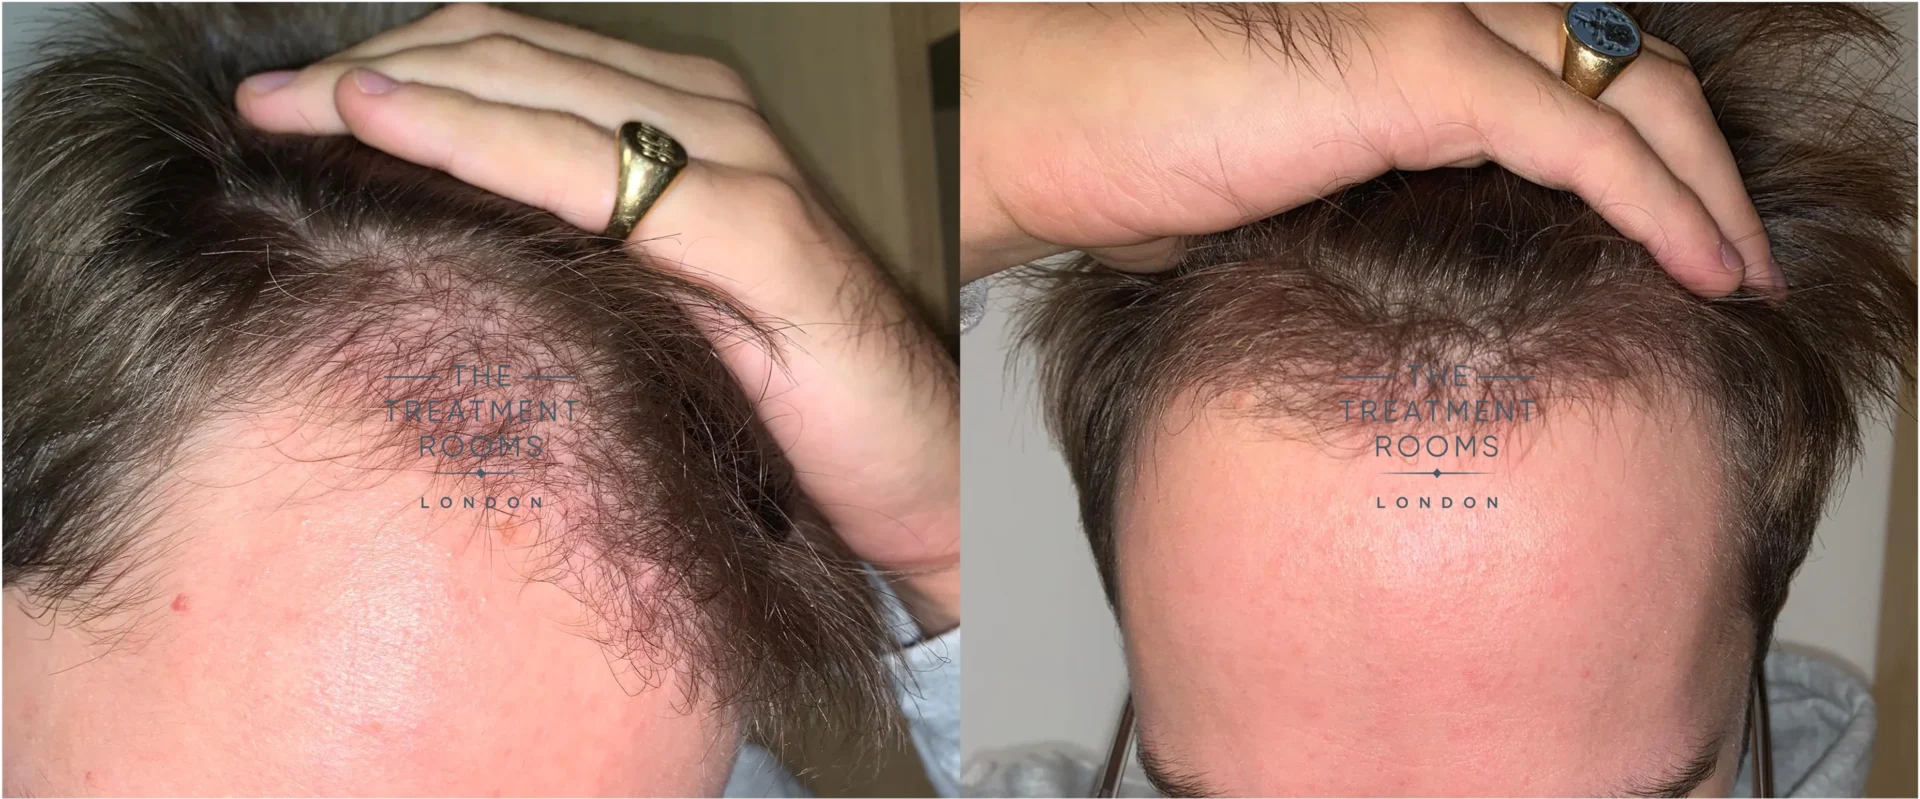 Unshaven hair transplant month 4 after surgery